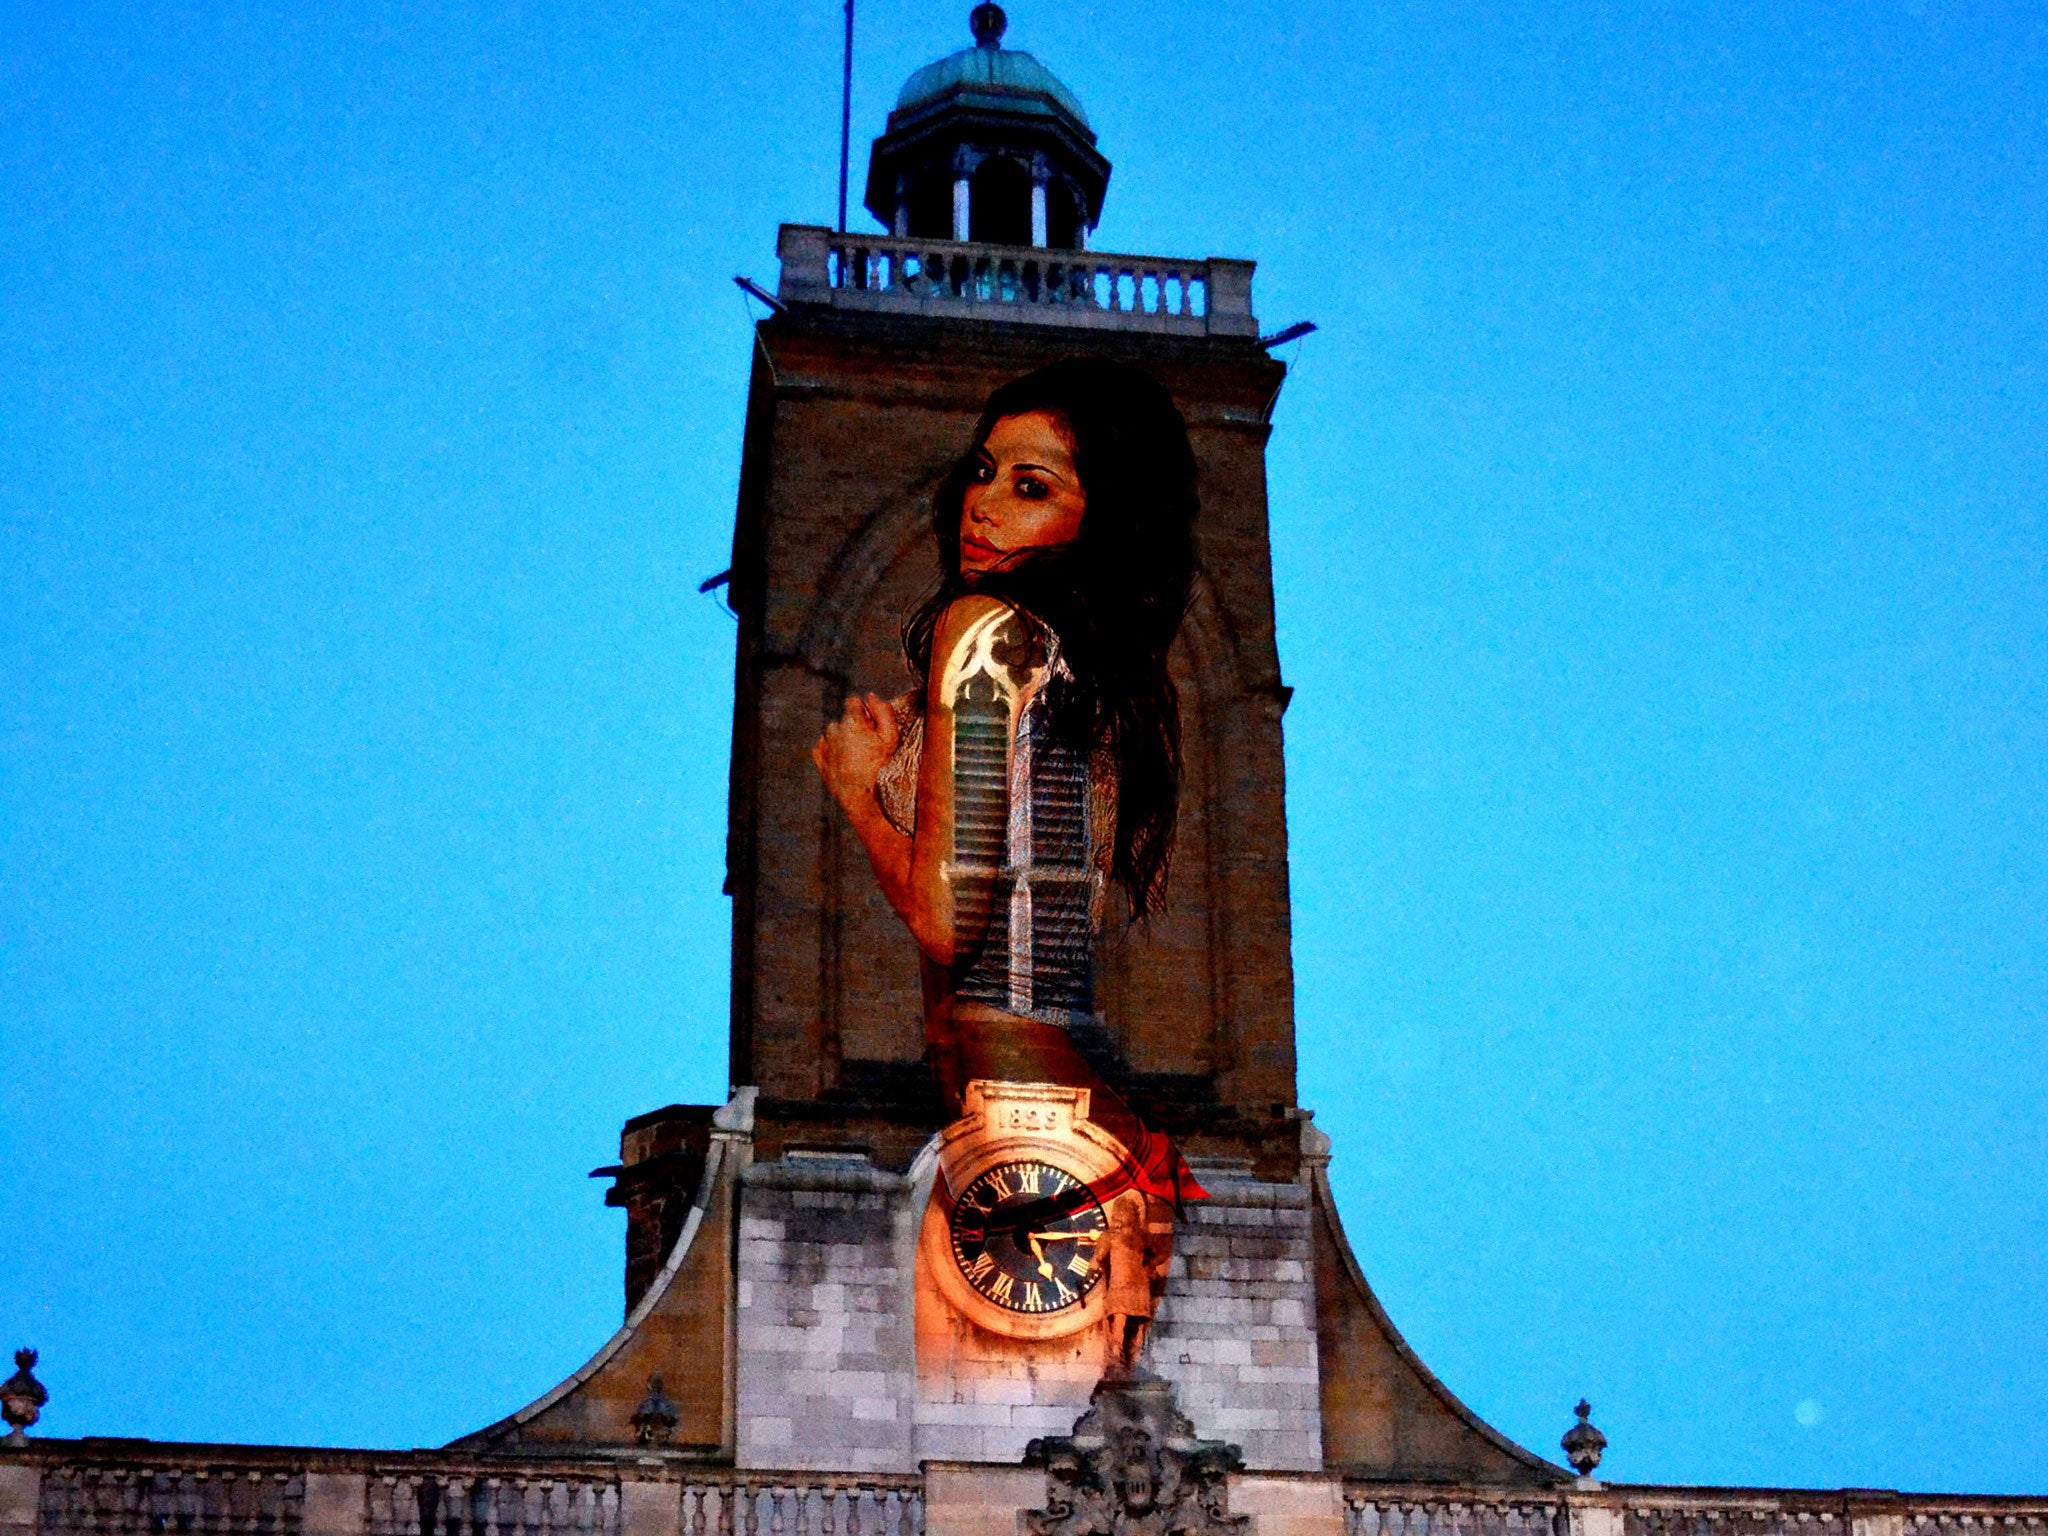 The casino which carried out the stunt said it 'meant no offence' by the promotion, which saw a 30ft semi-naked model projected onto the church tower at All Saints', Northampton